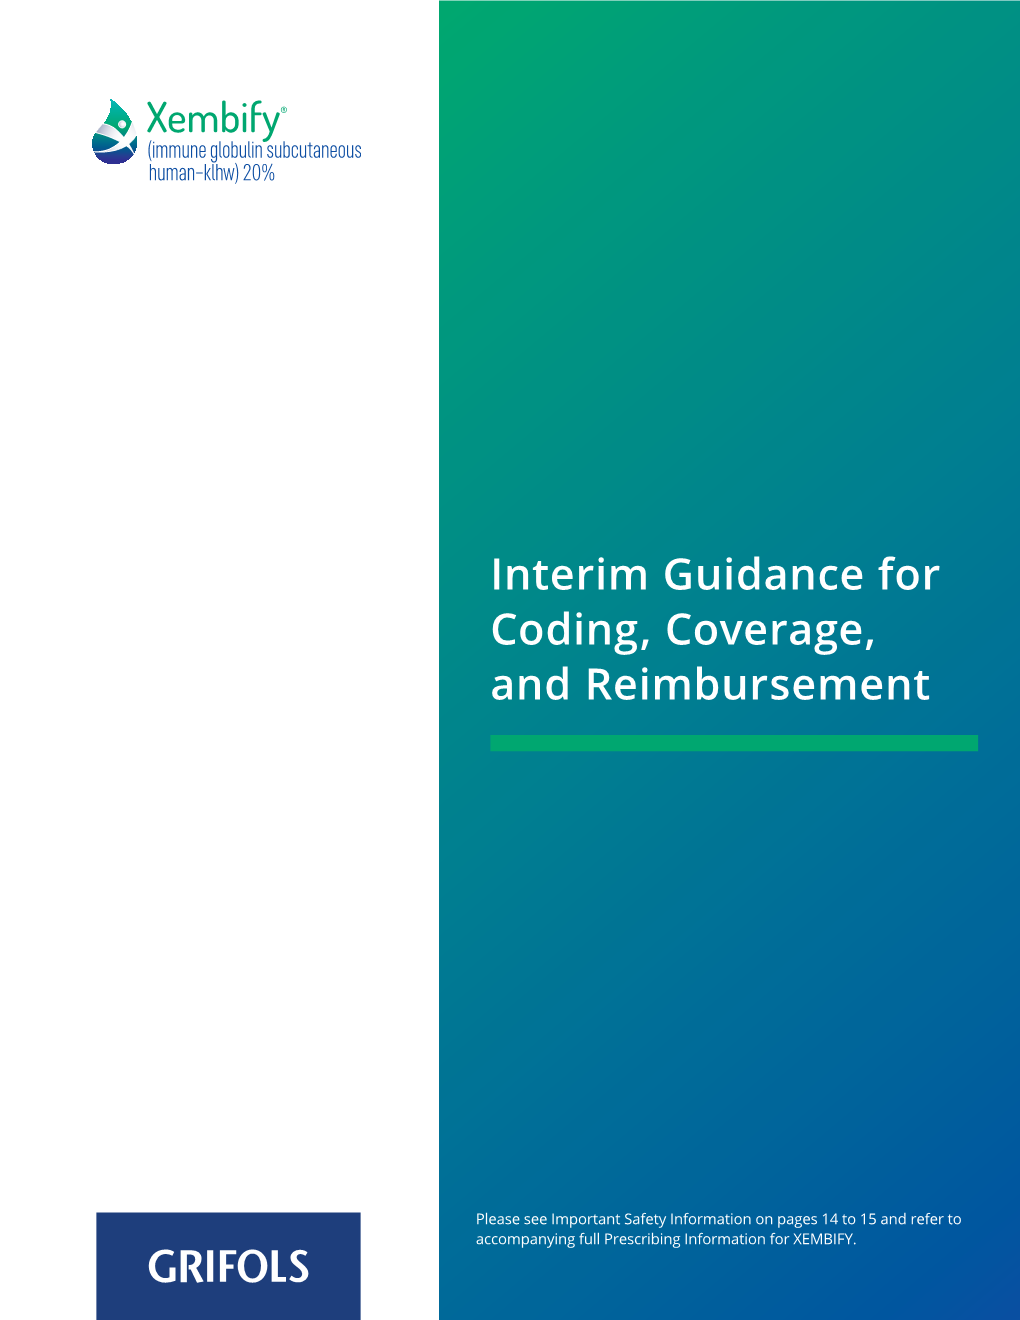 Interim Guidance for Coding, Coverage, and Reimbursement For